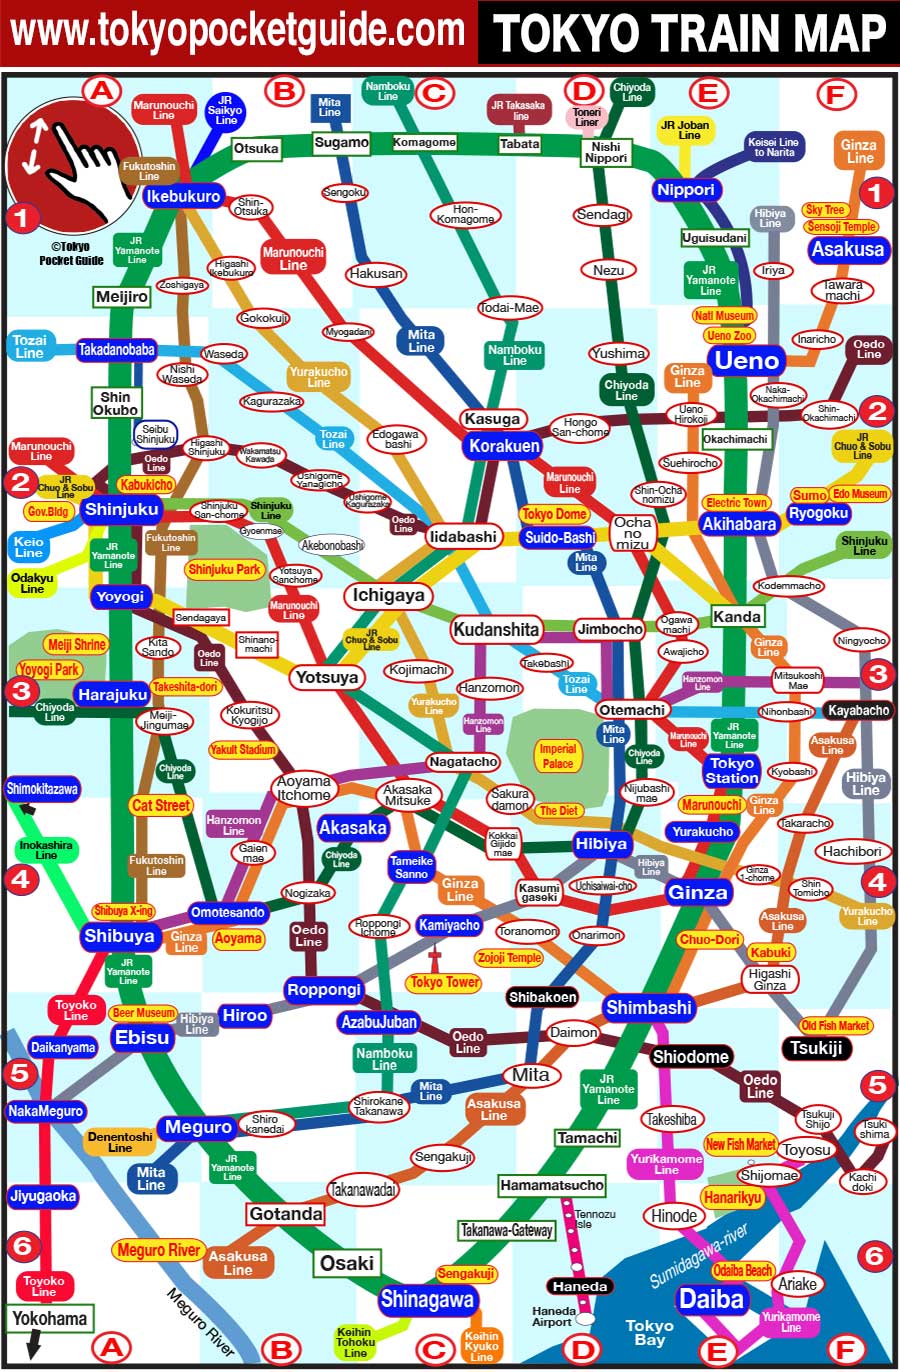 Tokyo Subway And Train Map For Tourists In English Tokyo Pocket